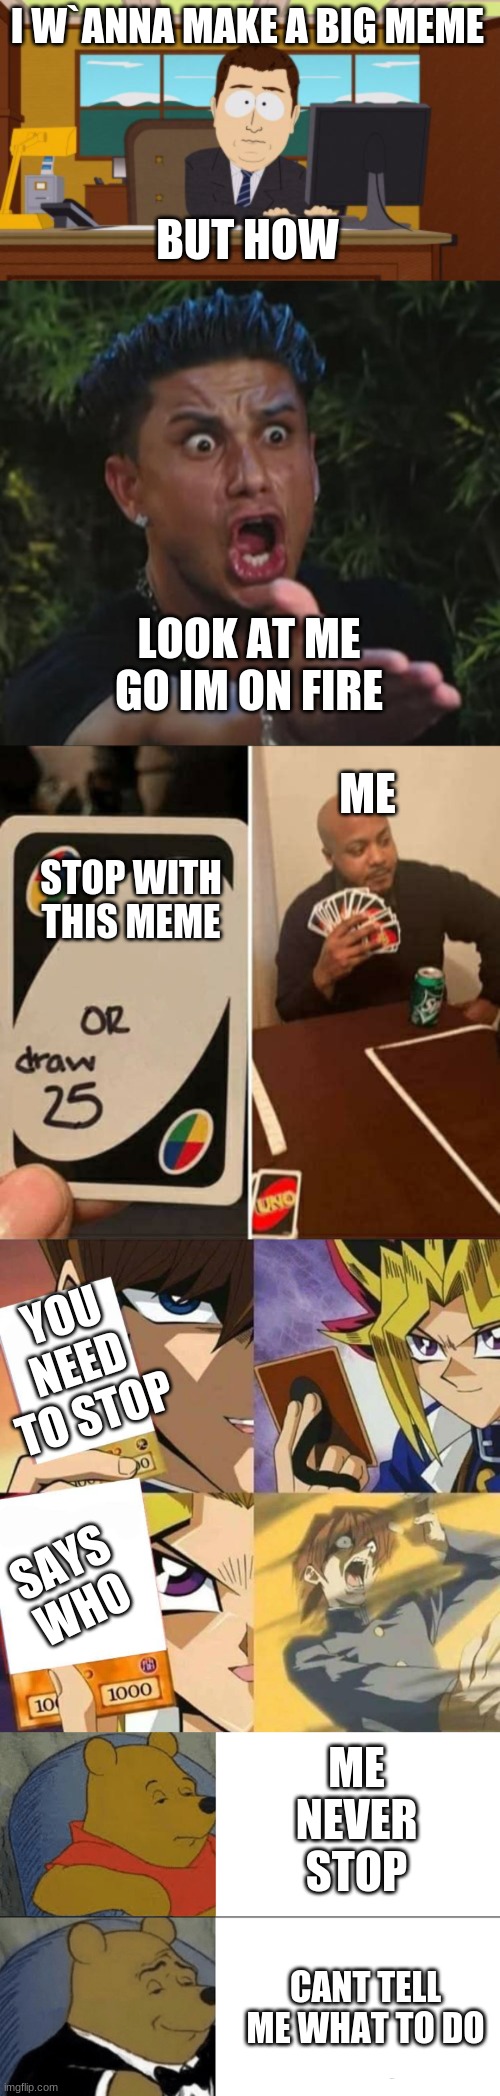 big meme | I W`ANNA MAKE A BIG MEME; BUT HOW; LOOK AT ME GO IM ON FIRE; ME; STOP WITH THIS MEME; YOU NEED TO STOP; SAYS WHO; ME NEVER STOP; CANT TELL ME WHAT TO DO | image tagged in memes,aaaaand its gone,dj pauly d,uno draw 25 cards,yugioh card draw,genteelman pooh | made w/ Imgflip meme maker